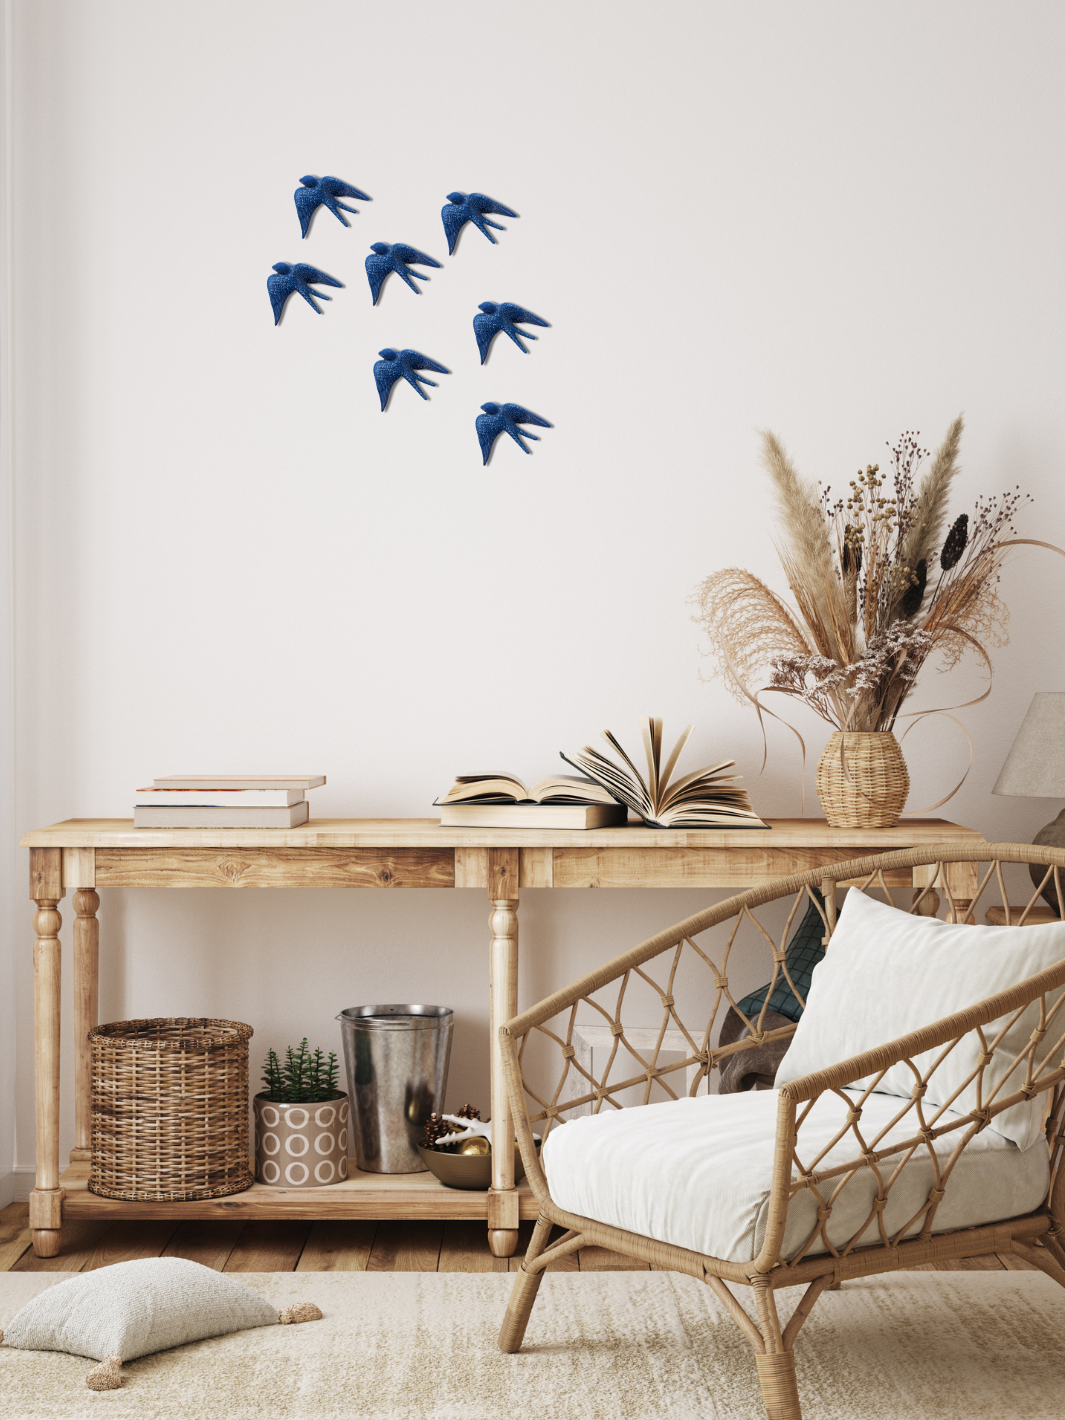 Hand Painted Large Ceramic Swallows for Home Décor - Various Colors